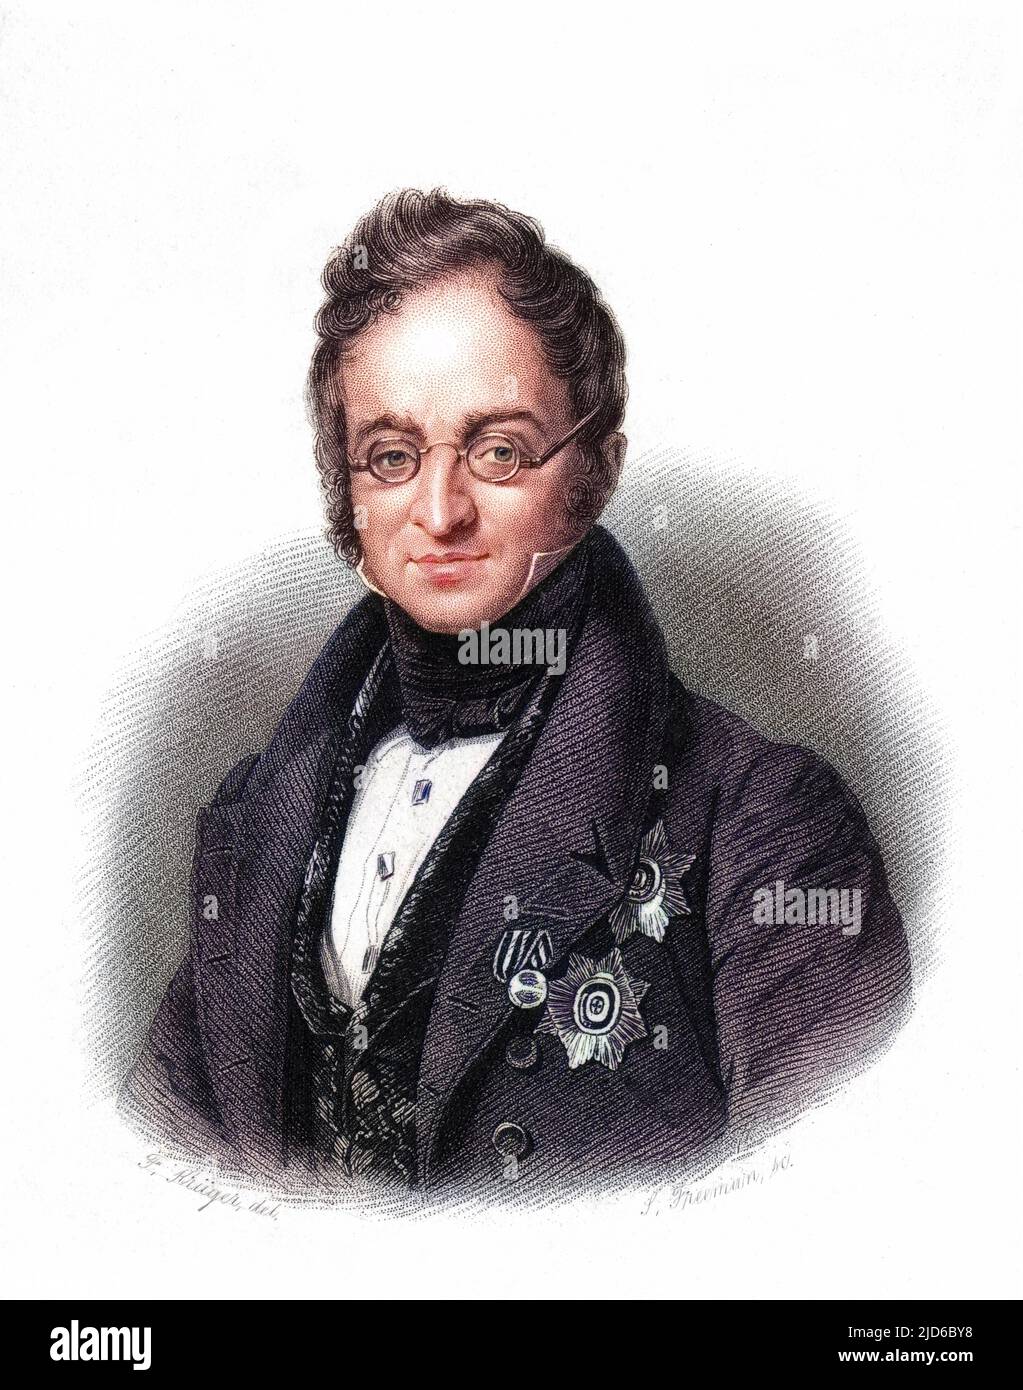 KARL ROBERT graf von NESSELRODE - Russian diplomat at Congress of Vienna etc., whose policies did much harm, including helping to precipitate the Crimean War. Colourised version of : 10167215       Date: 1780 - 1862 Stock Photo